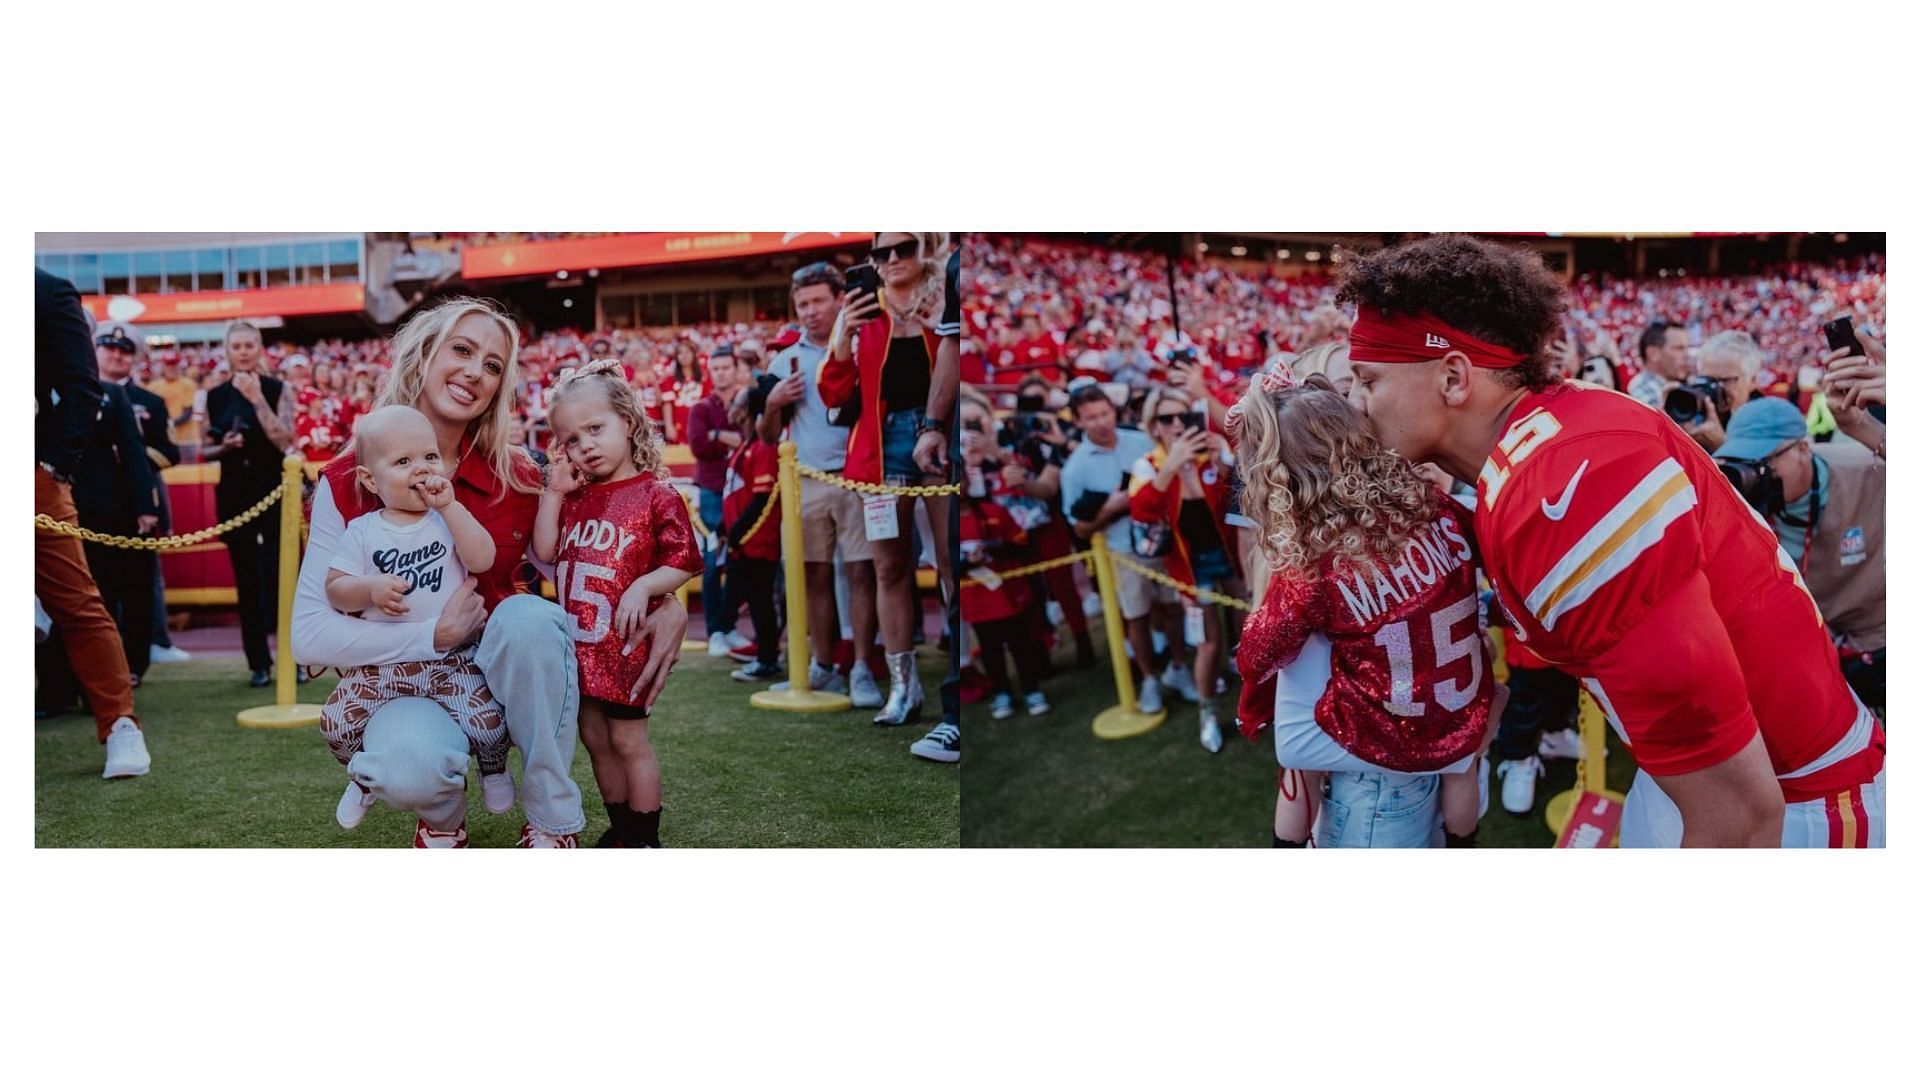 Image Credit: Brittany Mahomes&#039; Instagram Post